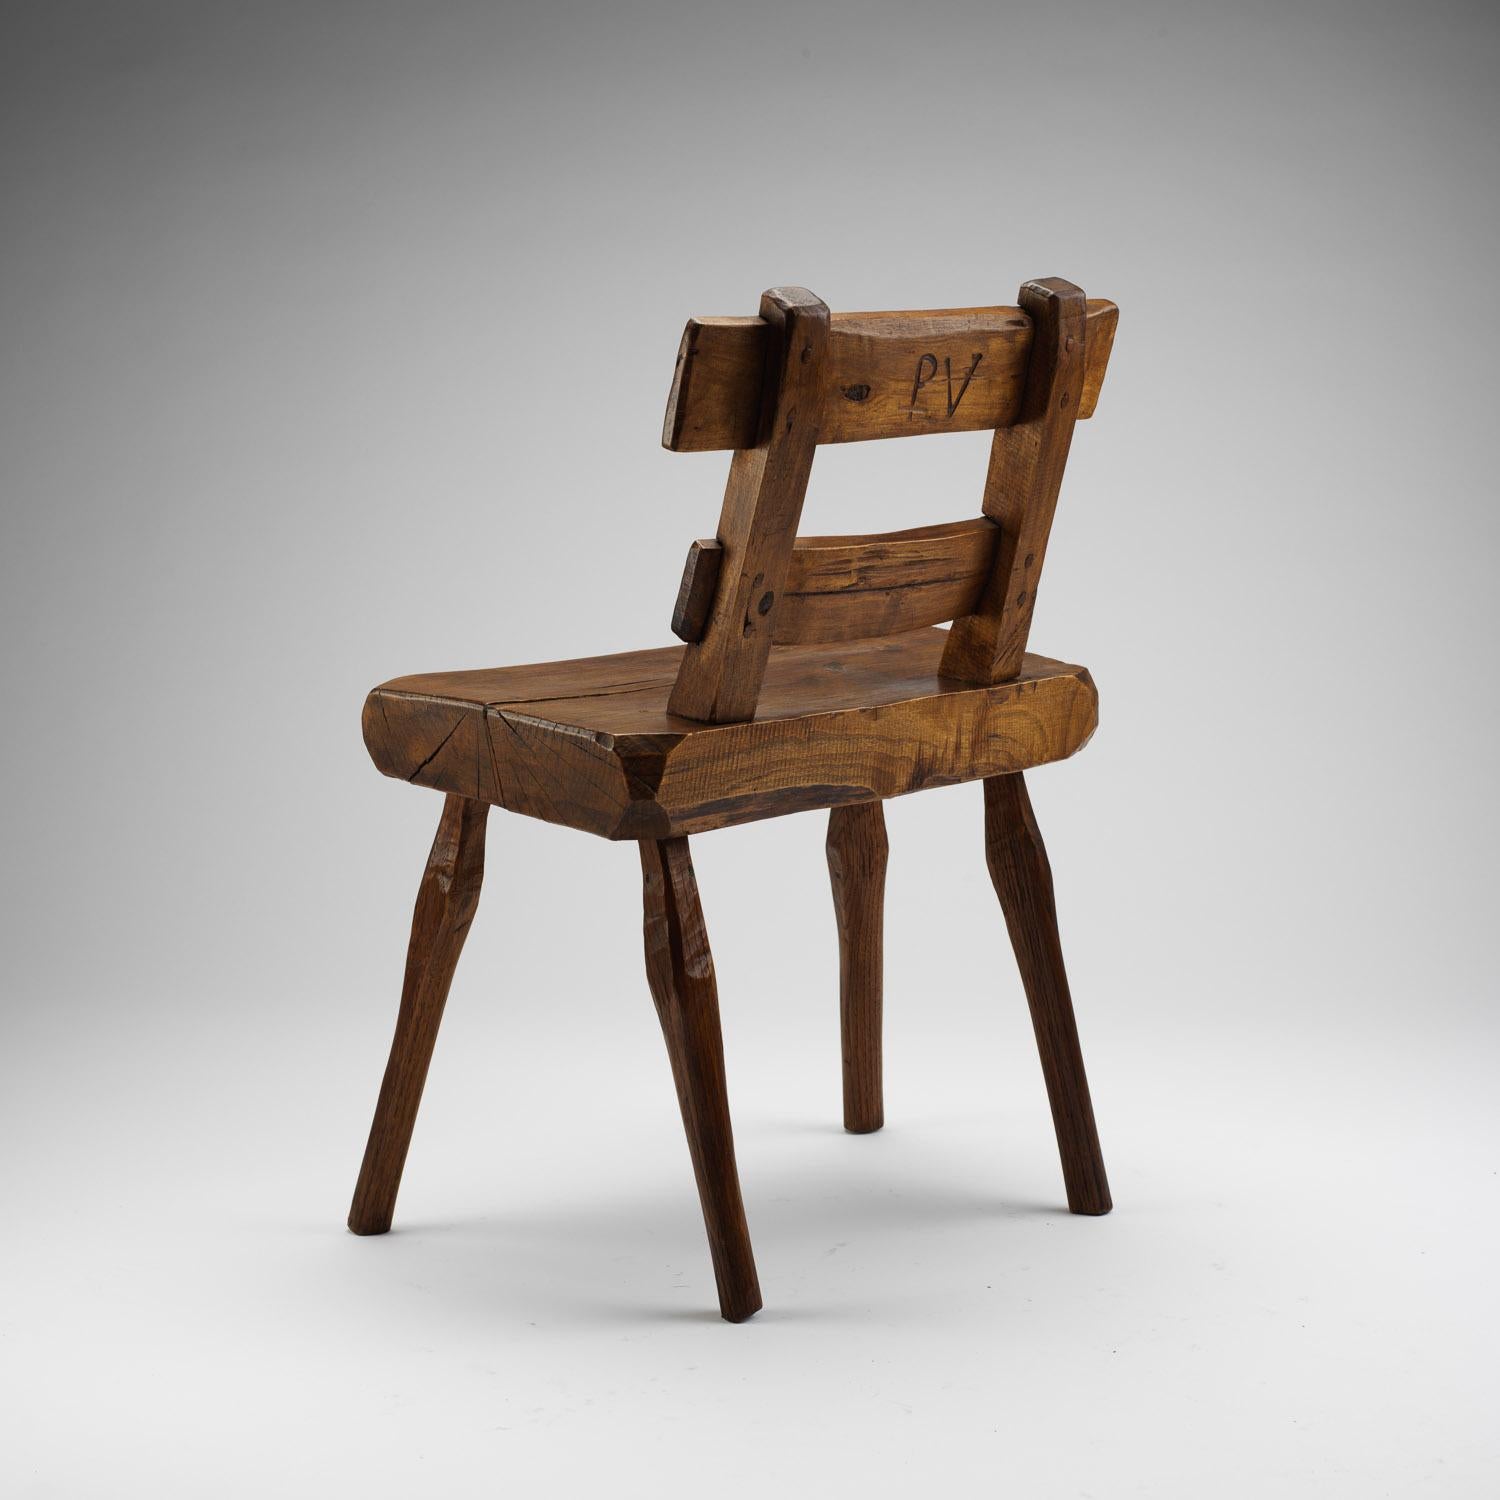 Hand-Carved Primitive Ladder-Back Alpine Chair, France, Early 1900s